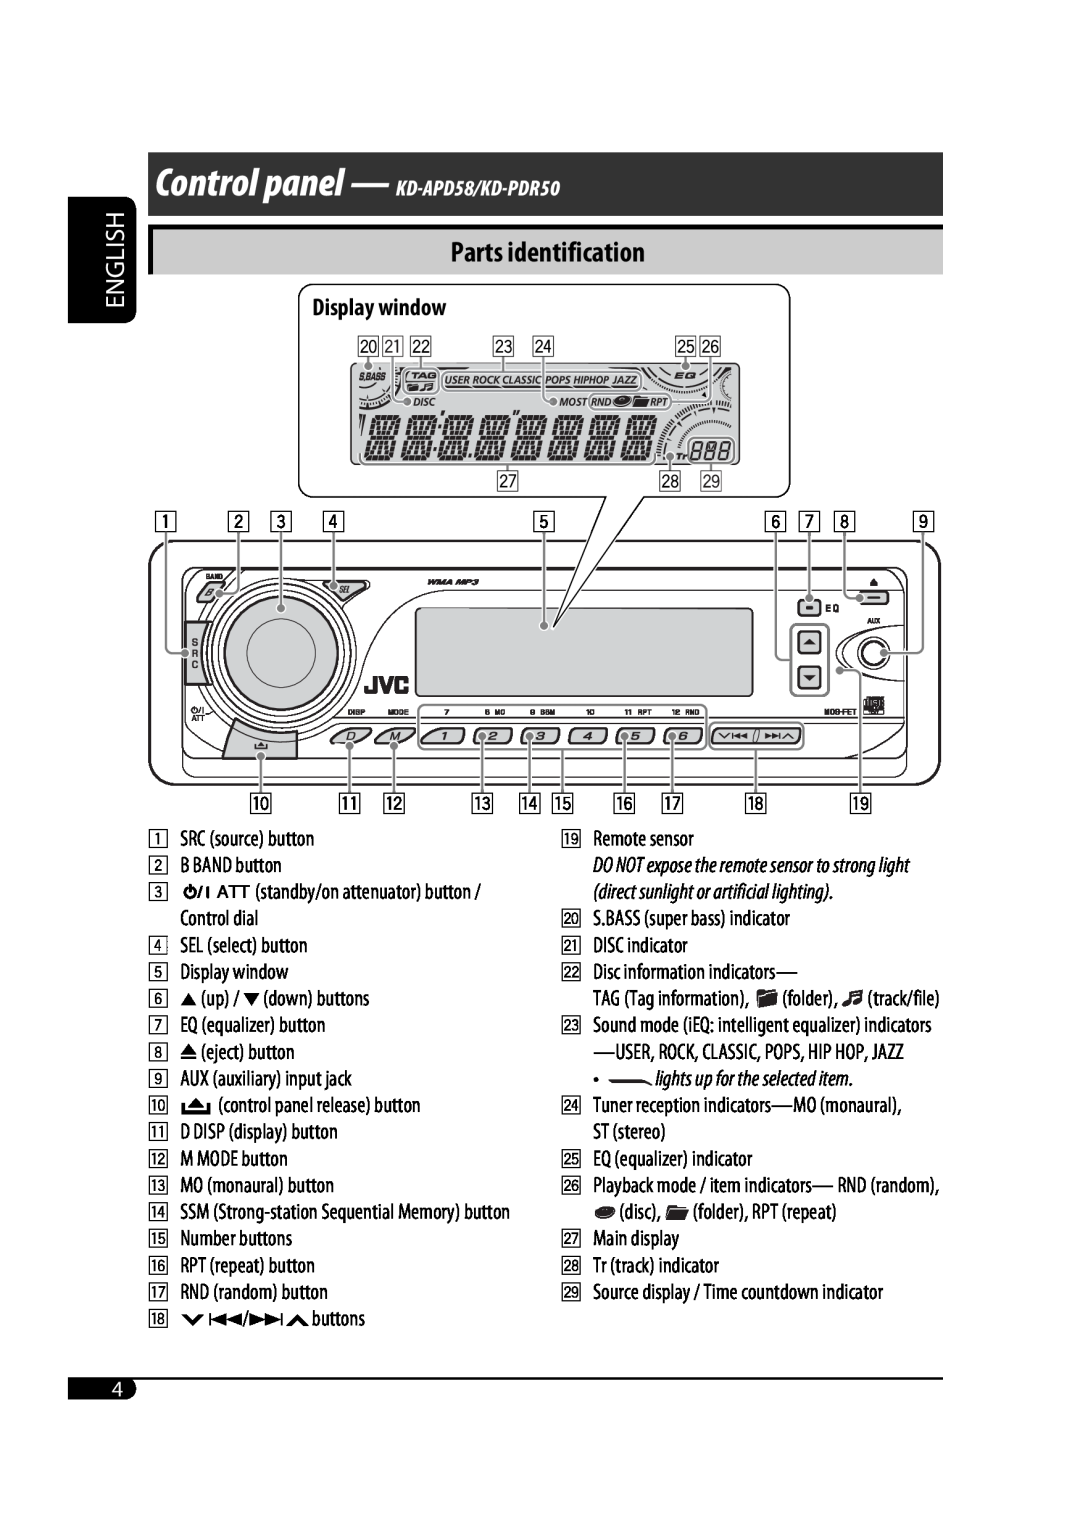 JVC GET0425-001A manual Parts identification, Display window, English, Control panel - KD-APD58/KD-PDR50 